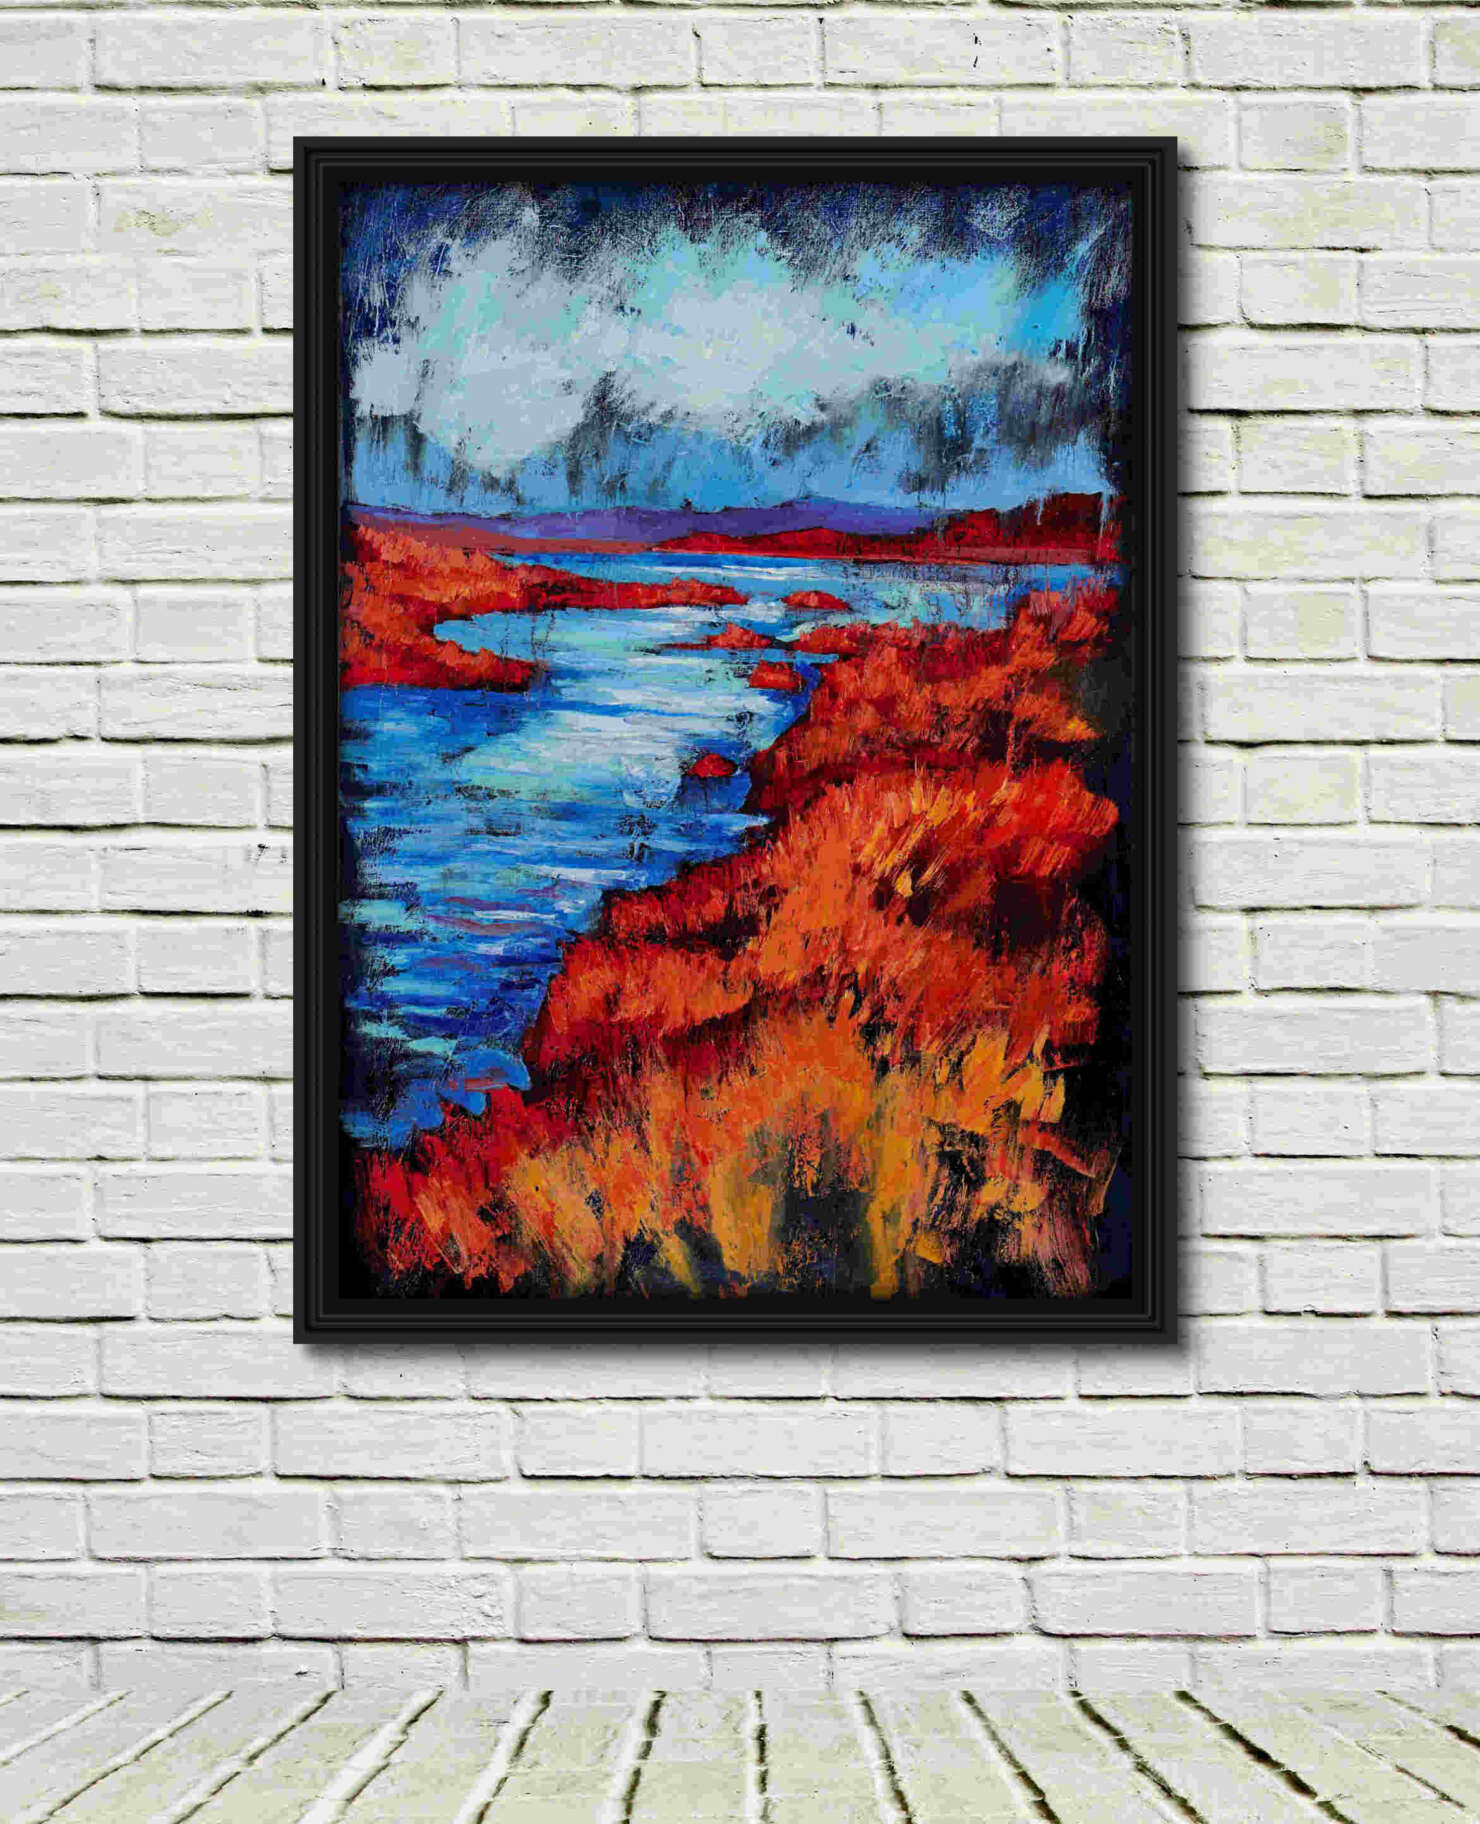 artist rod coyne's landscape "Ardcost Estuary" is shown here in a black frame in a white room.